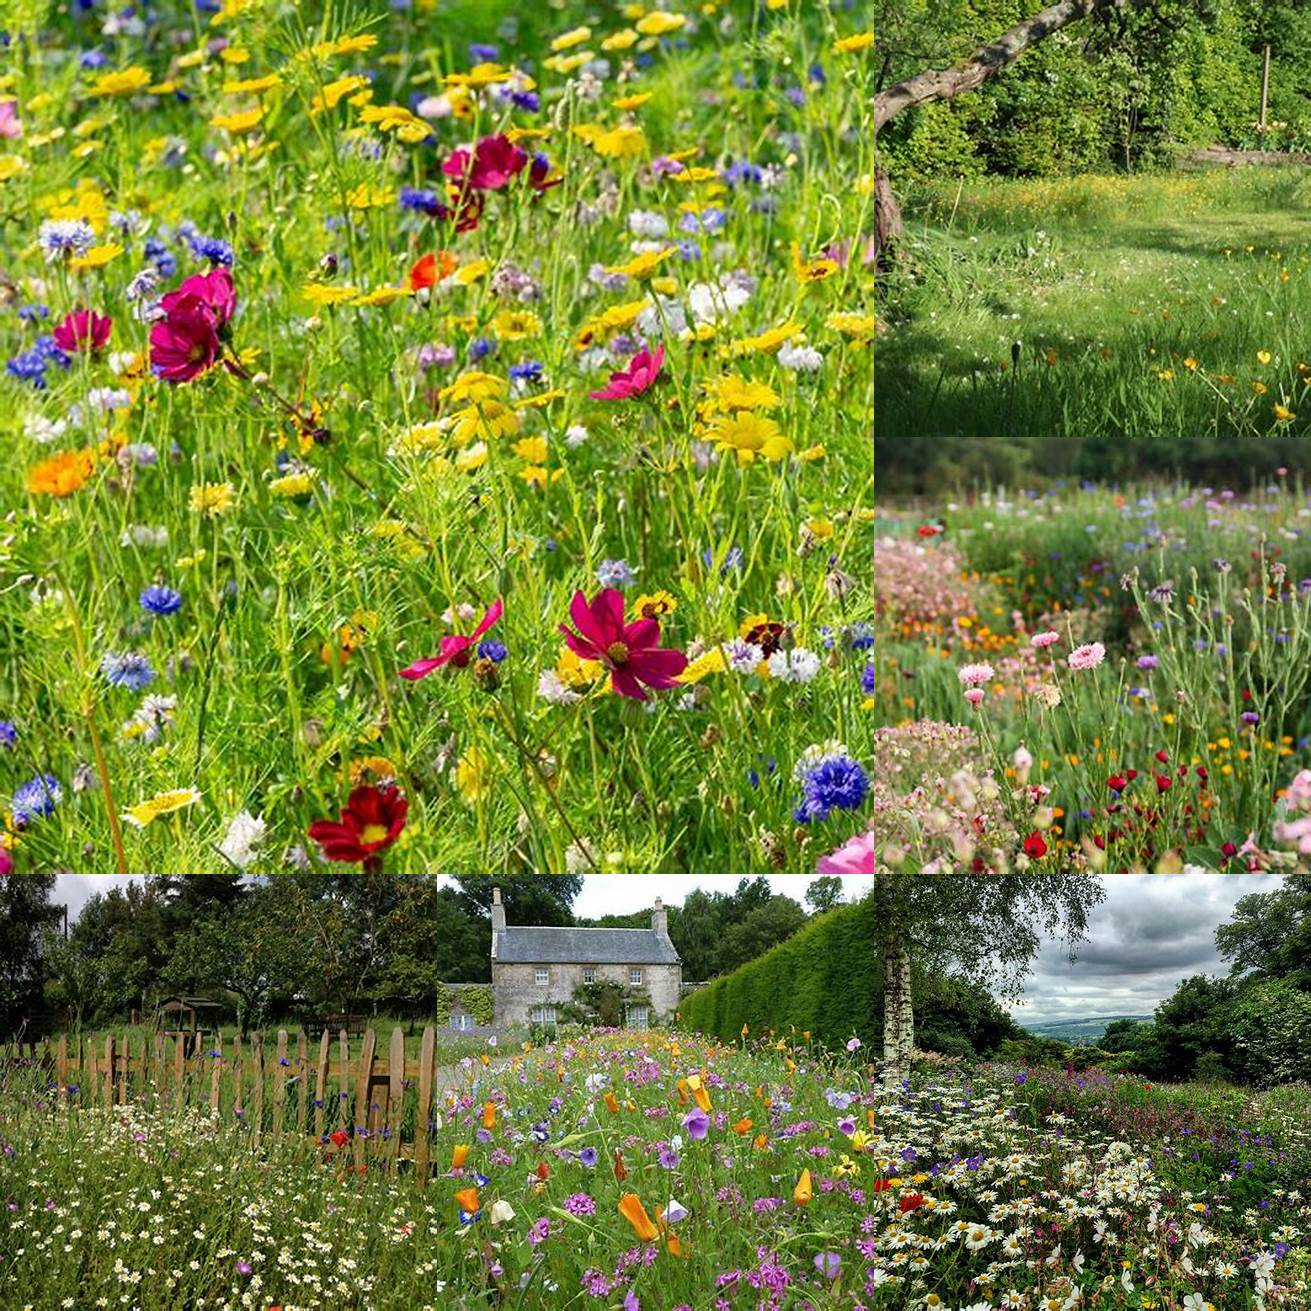 A wildflower meadow can add a natural and whimsical feel to your garden